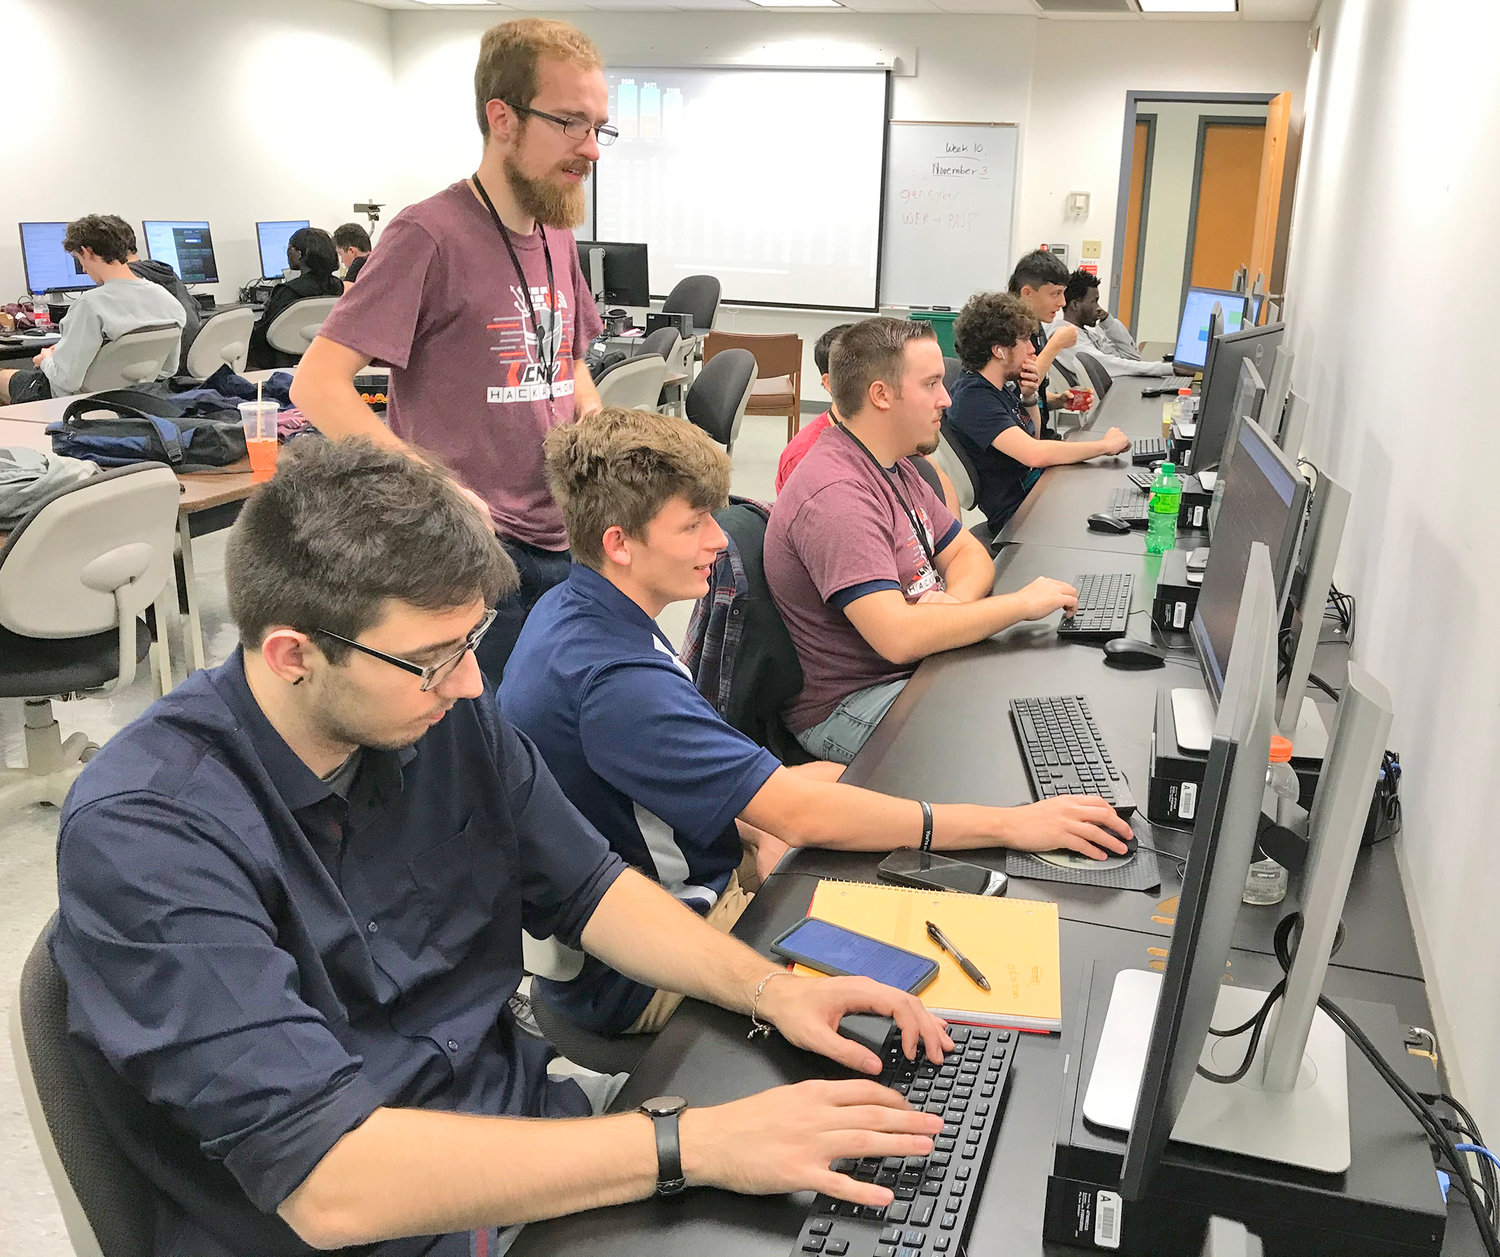 Facilitator Sean Drzewiecki, standing, offers guidance to college students participating in the CNY Hackathon Saturday at Mohawk Valley Community College in Utica.